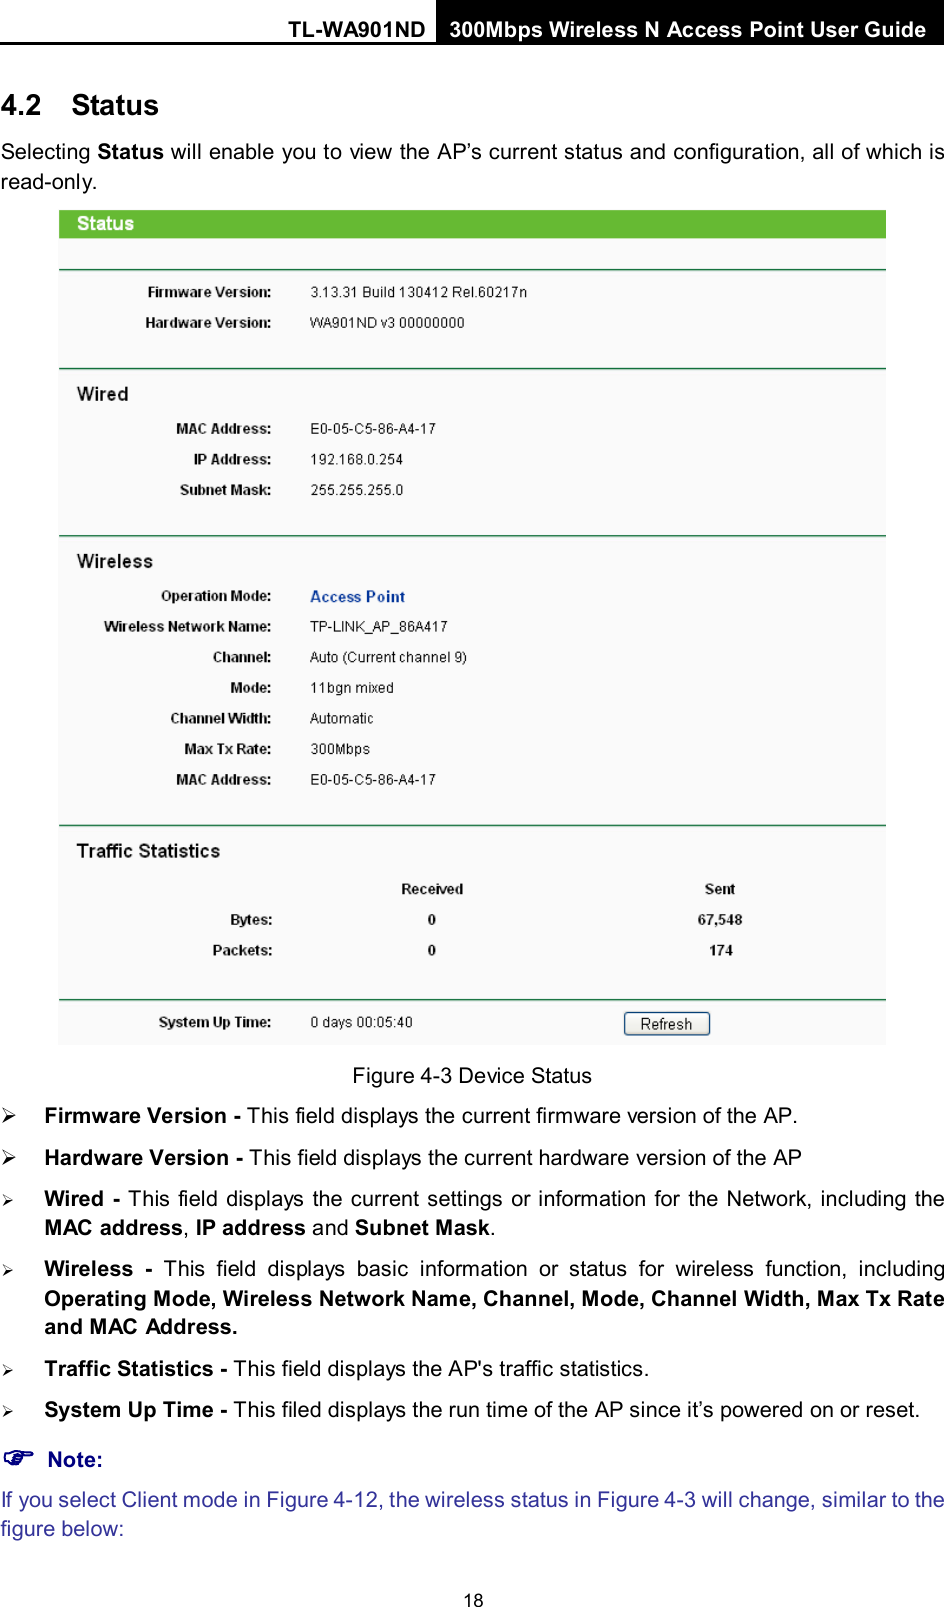 TL-WA901ND 300Mbps Wireless N Access Point User Guide  18 4.2 Status Selecting Status will enable you to view the AP’s current status and configuration, all of which is read-only.  Figure 4-3 Device Status  Firmware Version - This field displays the current firmware version of the AP.  Hardware Version - This field displays the current hardware version of the AP  Wired - This field displays the current settings or information for the Network, including the MAC address, IP address and Subnet Mask.  Wireless - This field displays basic information or status for wireless function, including Operating Mode, Wireless Network Name, Channel, Mode, Channel Width, Max Tx Rate and MAC Address.  Traffic Statistics - This field displays the AP&apos;s traffic statistics.    System Up Time - This filed displays the run time of the AP since it’s powered on or reset.    Note: If you select Client mode in Figure 4-12, the wireless status in Figure 4-3 will change, similar to the figure below: 